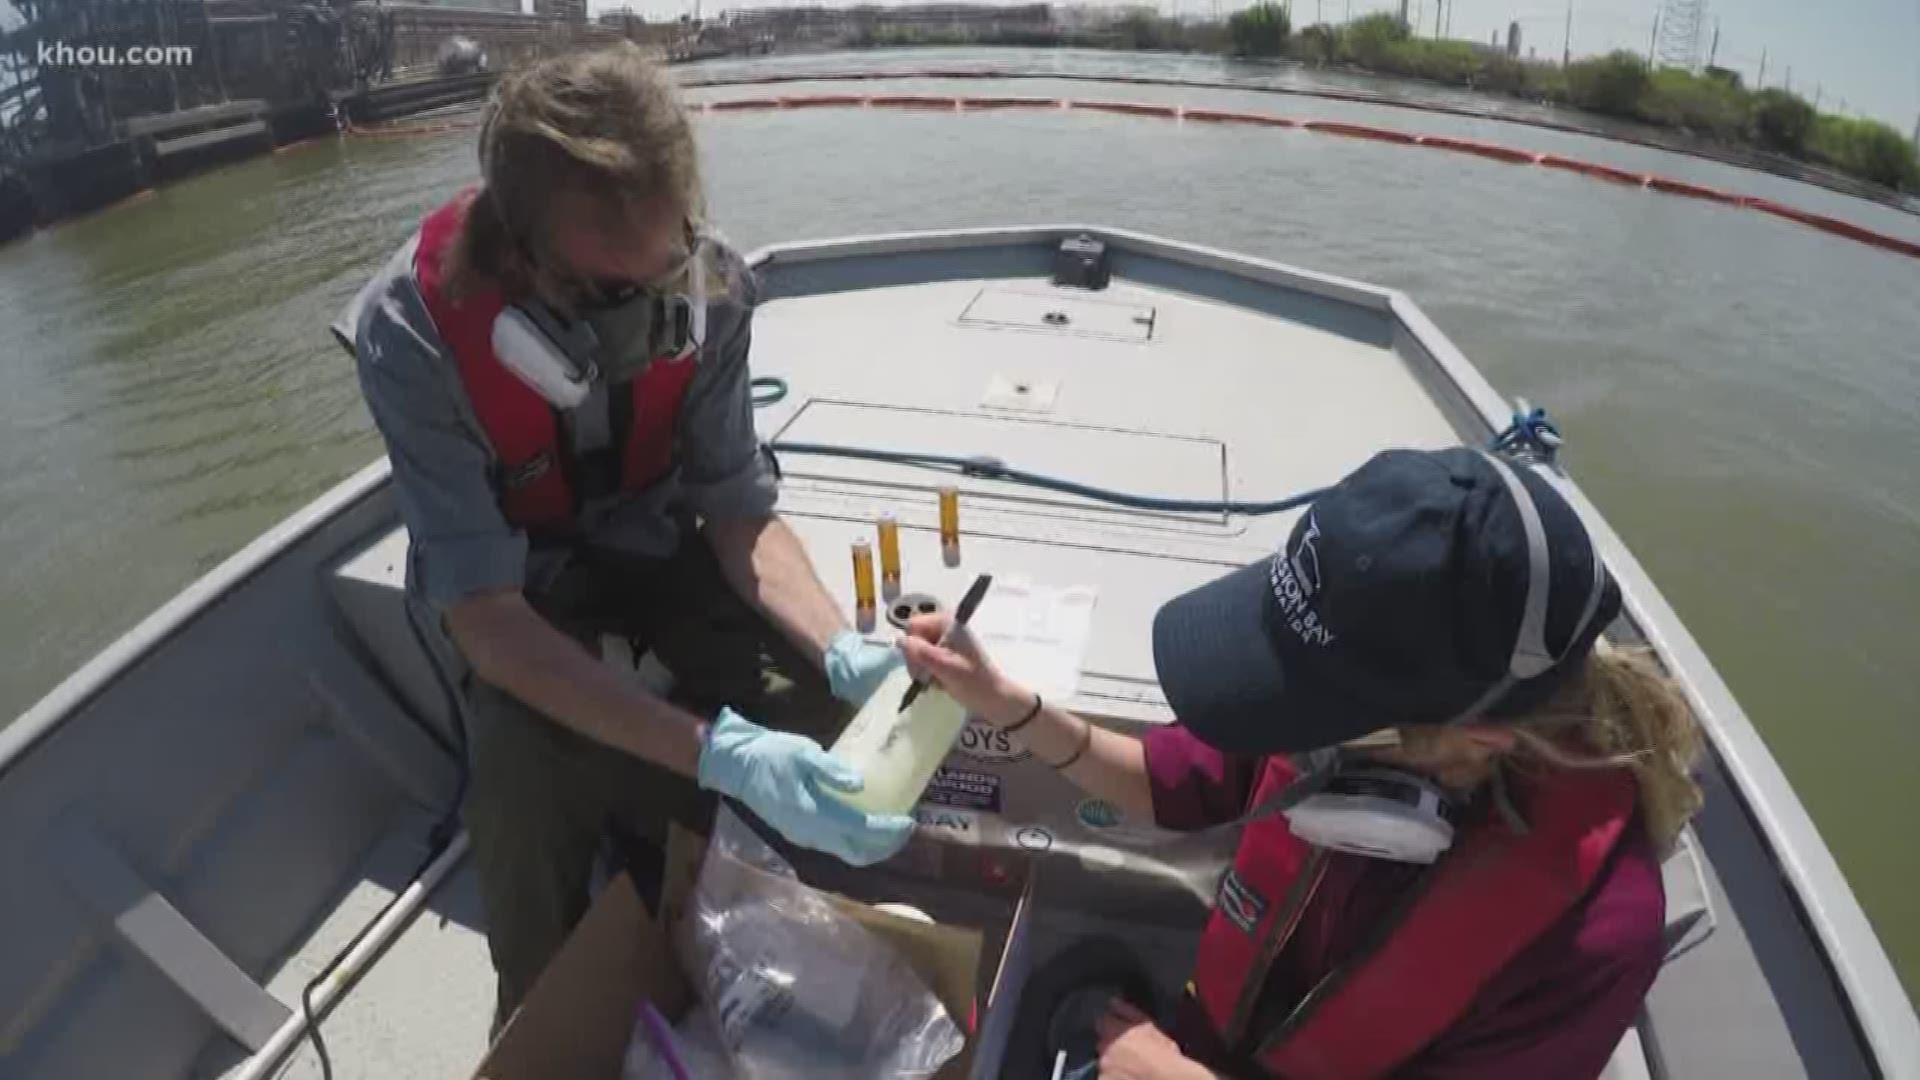 Galveston Bay Foundation on Monday released results from its multi-day water monitoring samples that indicate the presence of benzene in the Houston Ship Channel.